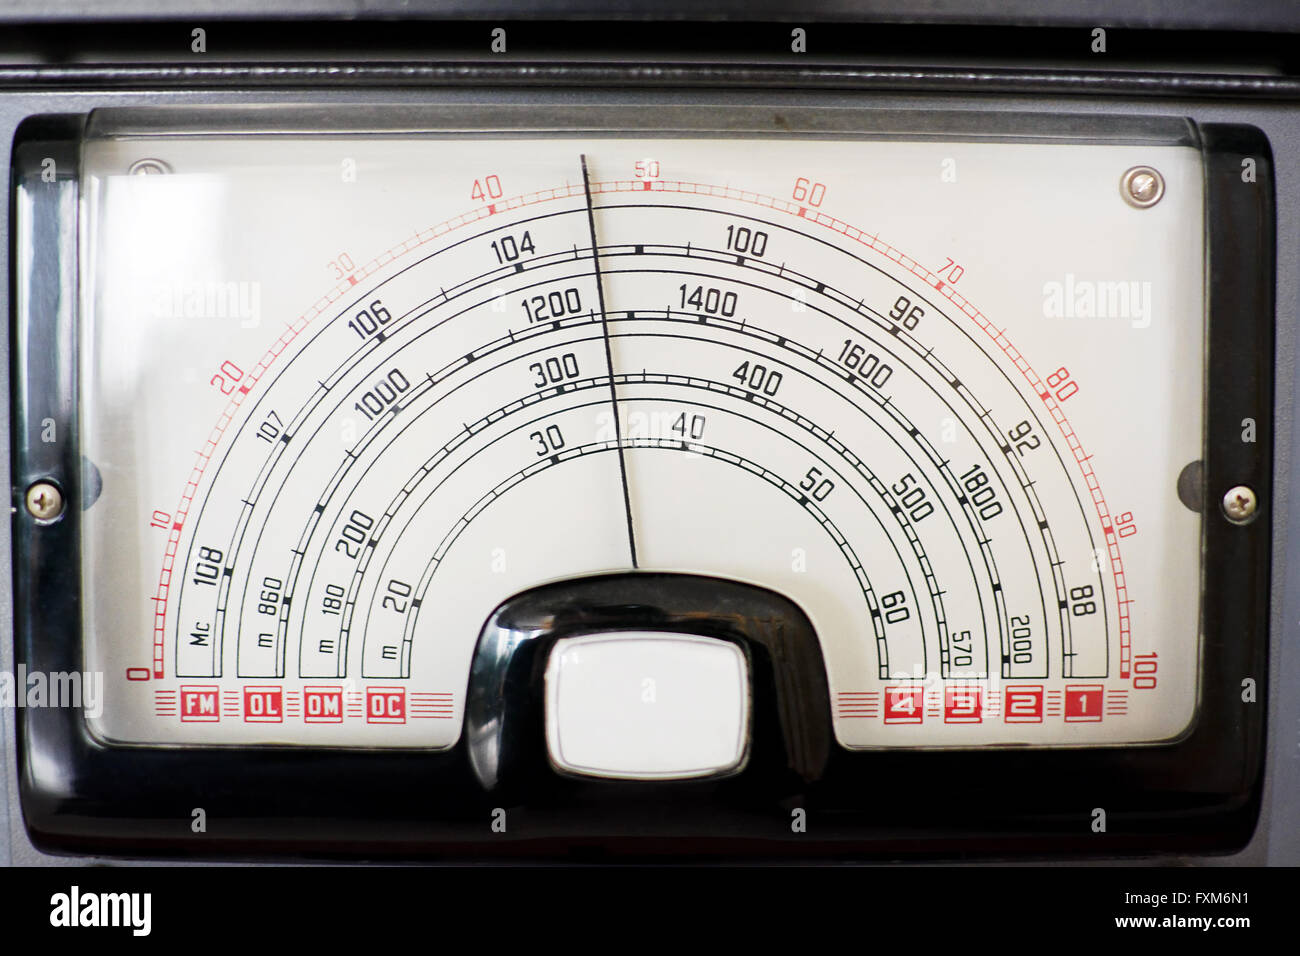 frequency indicator of an old radio Stock Photo